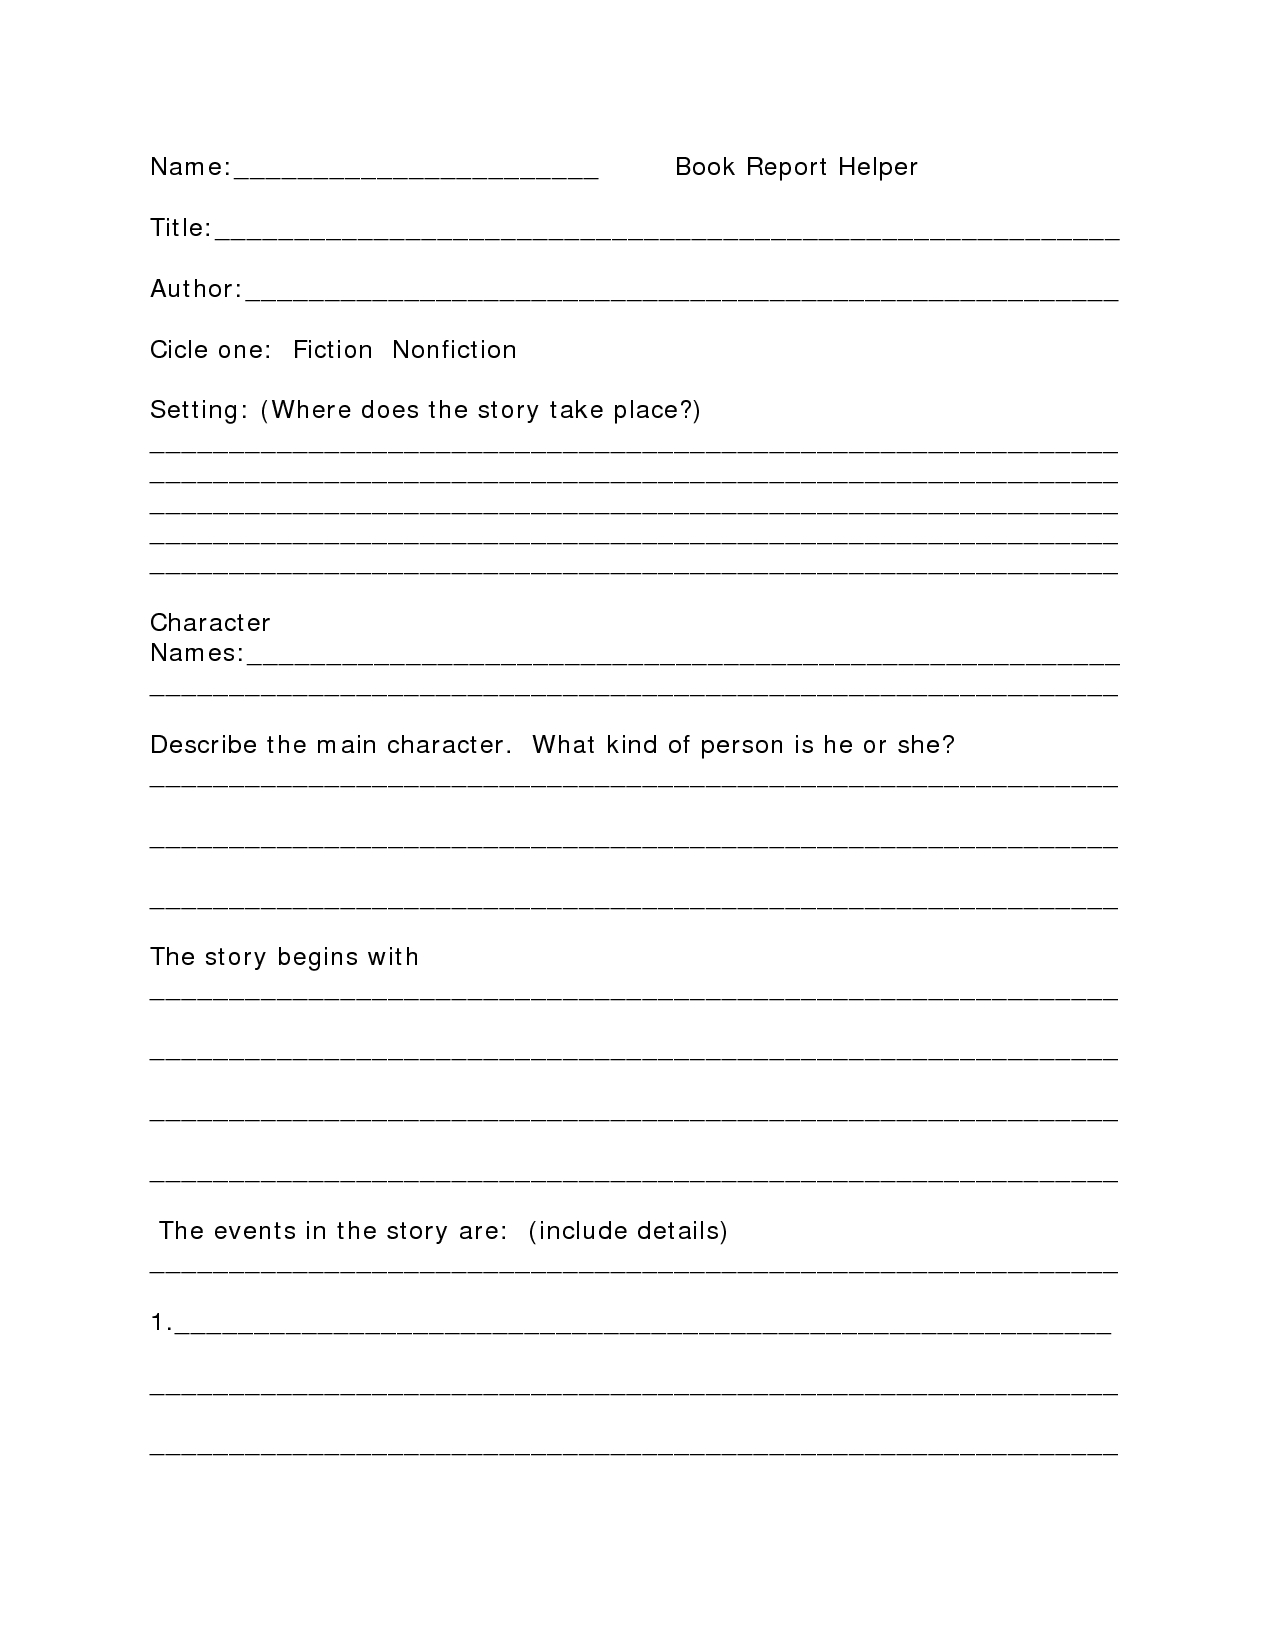 School Book Report Template – Teplates For Every Day Regarding High School Book Report Template